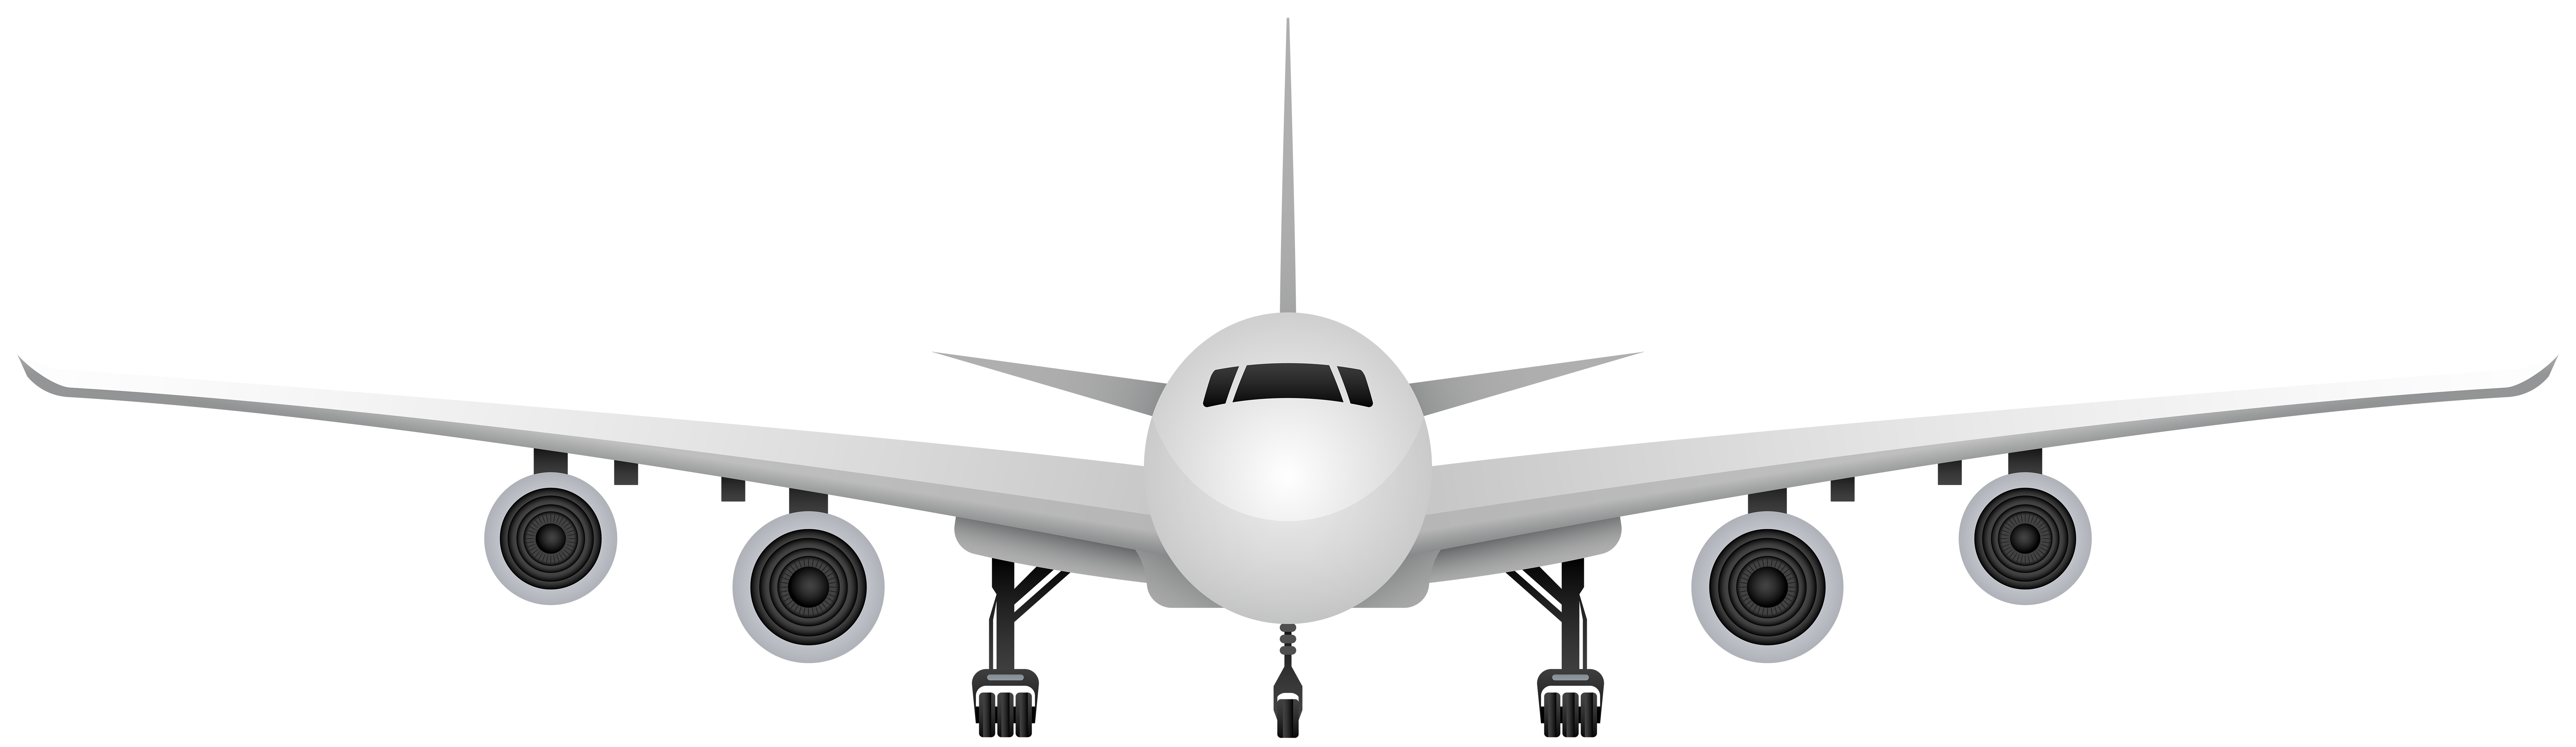 Airplane PNG Clip Art Image.